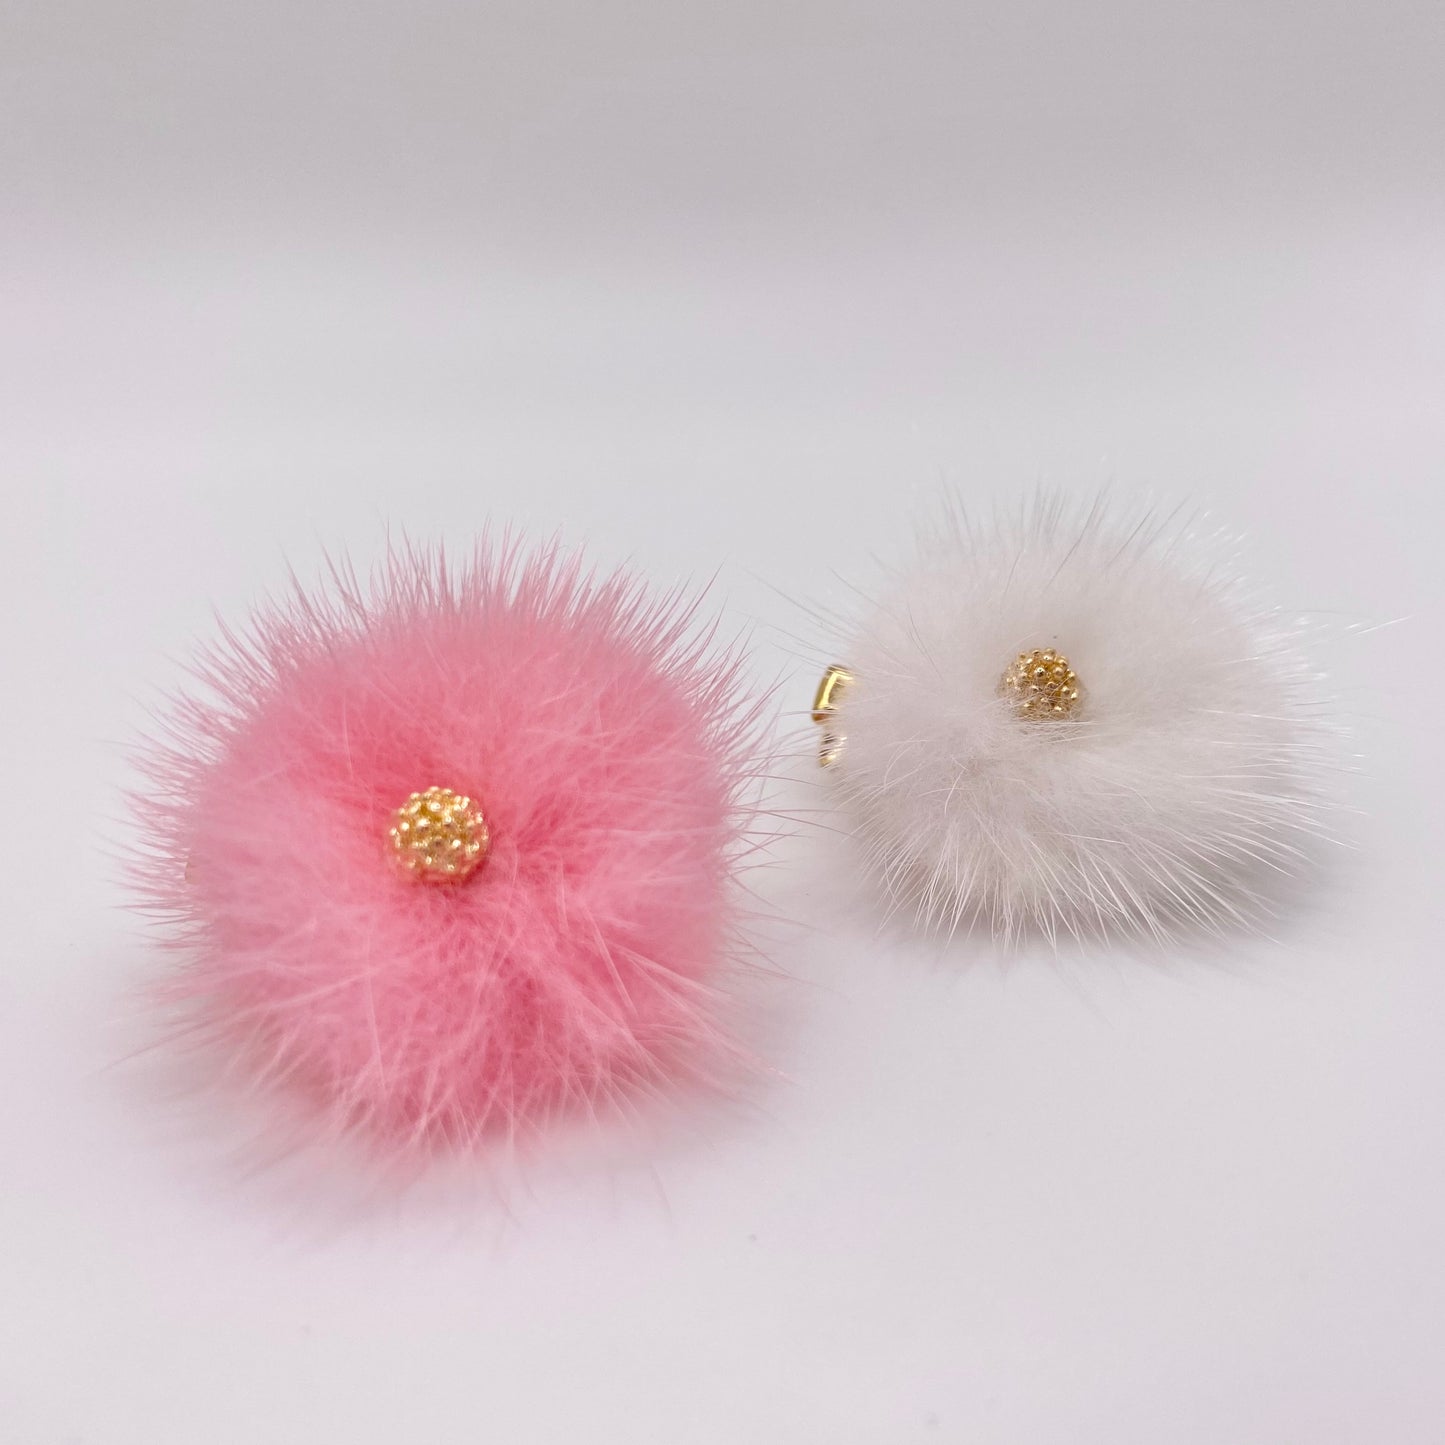 Pink and White Puffy Barrettes - Set of 2